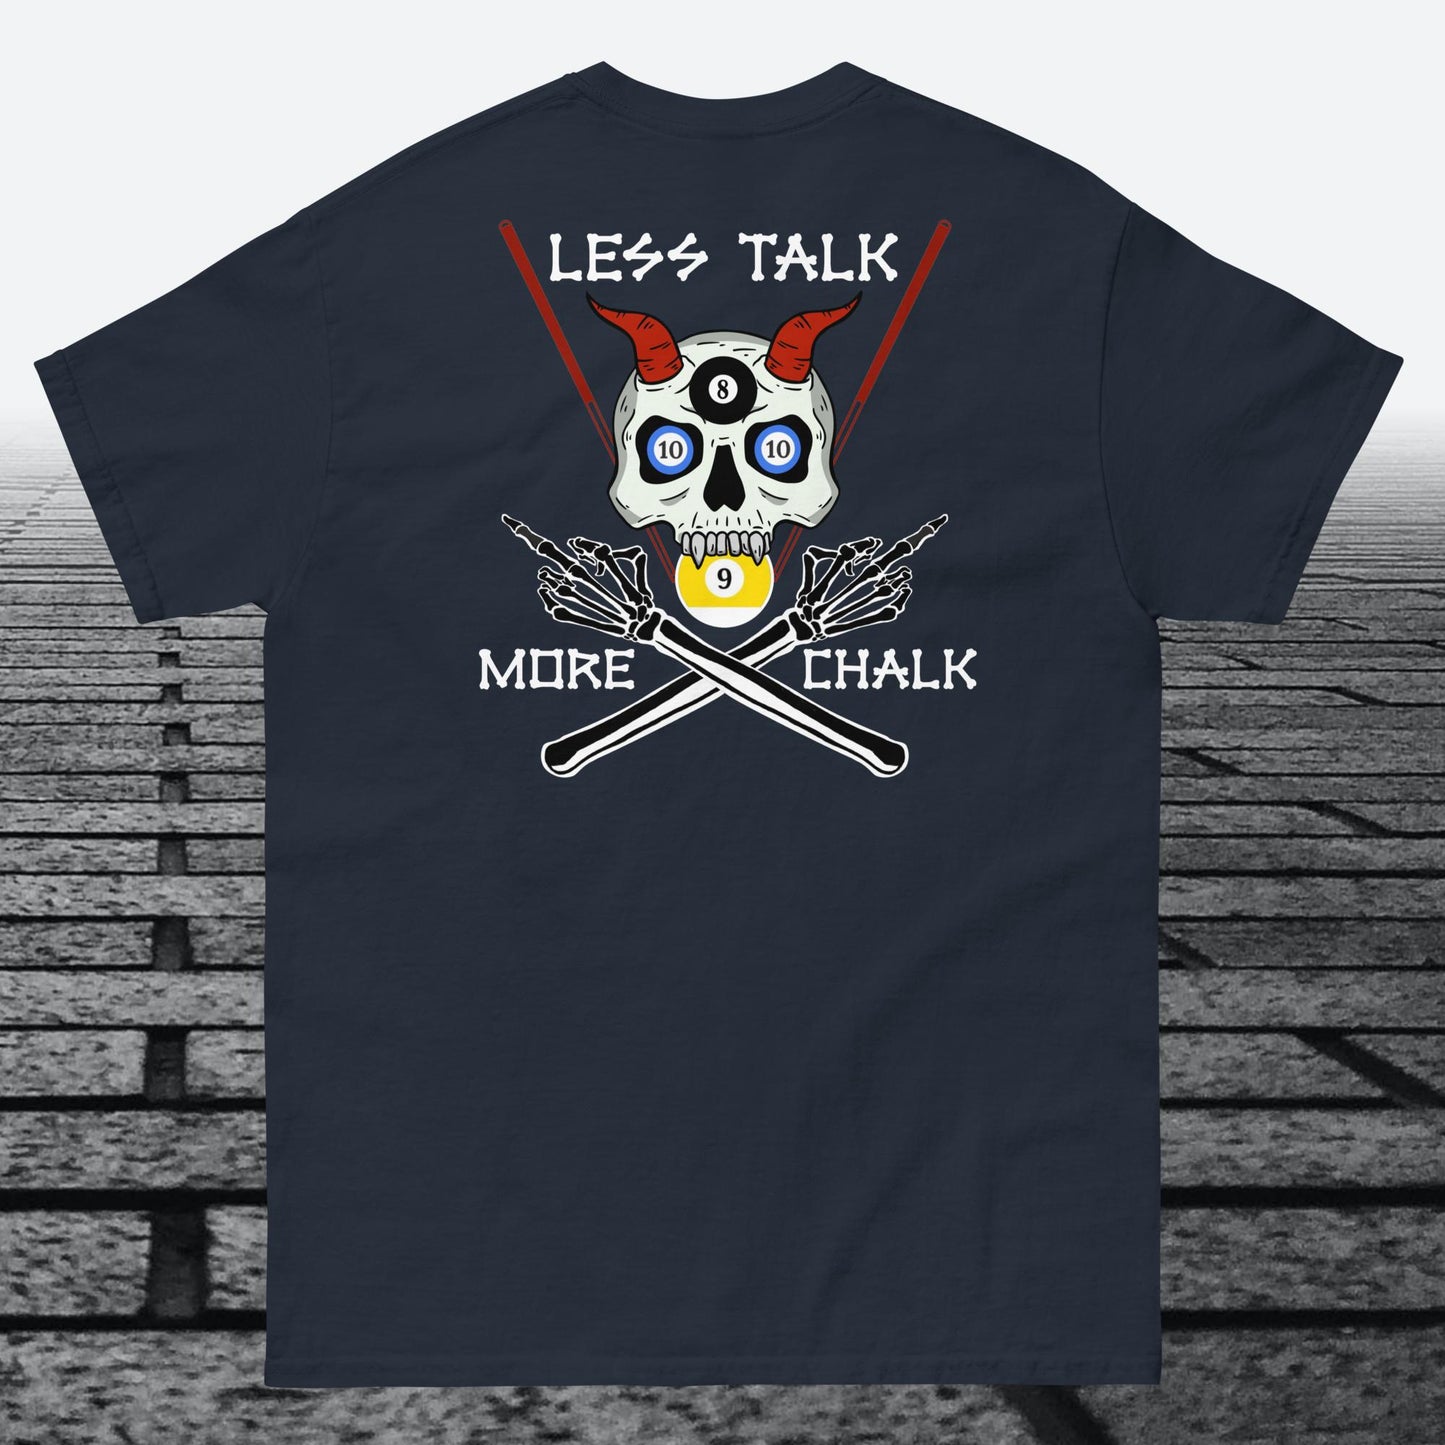 Less Talk More Chalk, with logo on front of shirt,  Cotton t-shirt